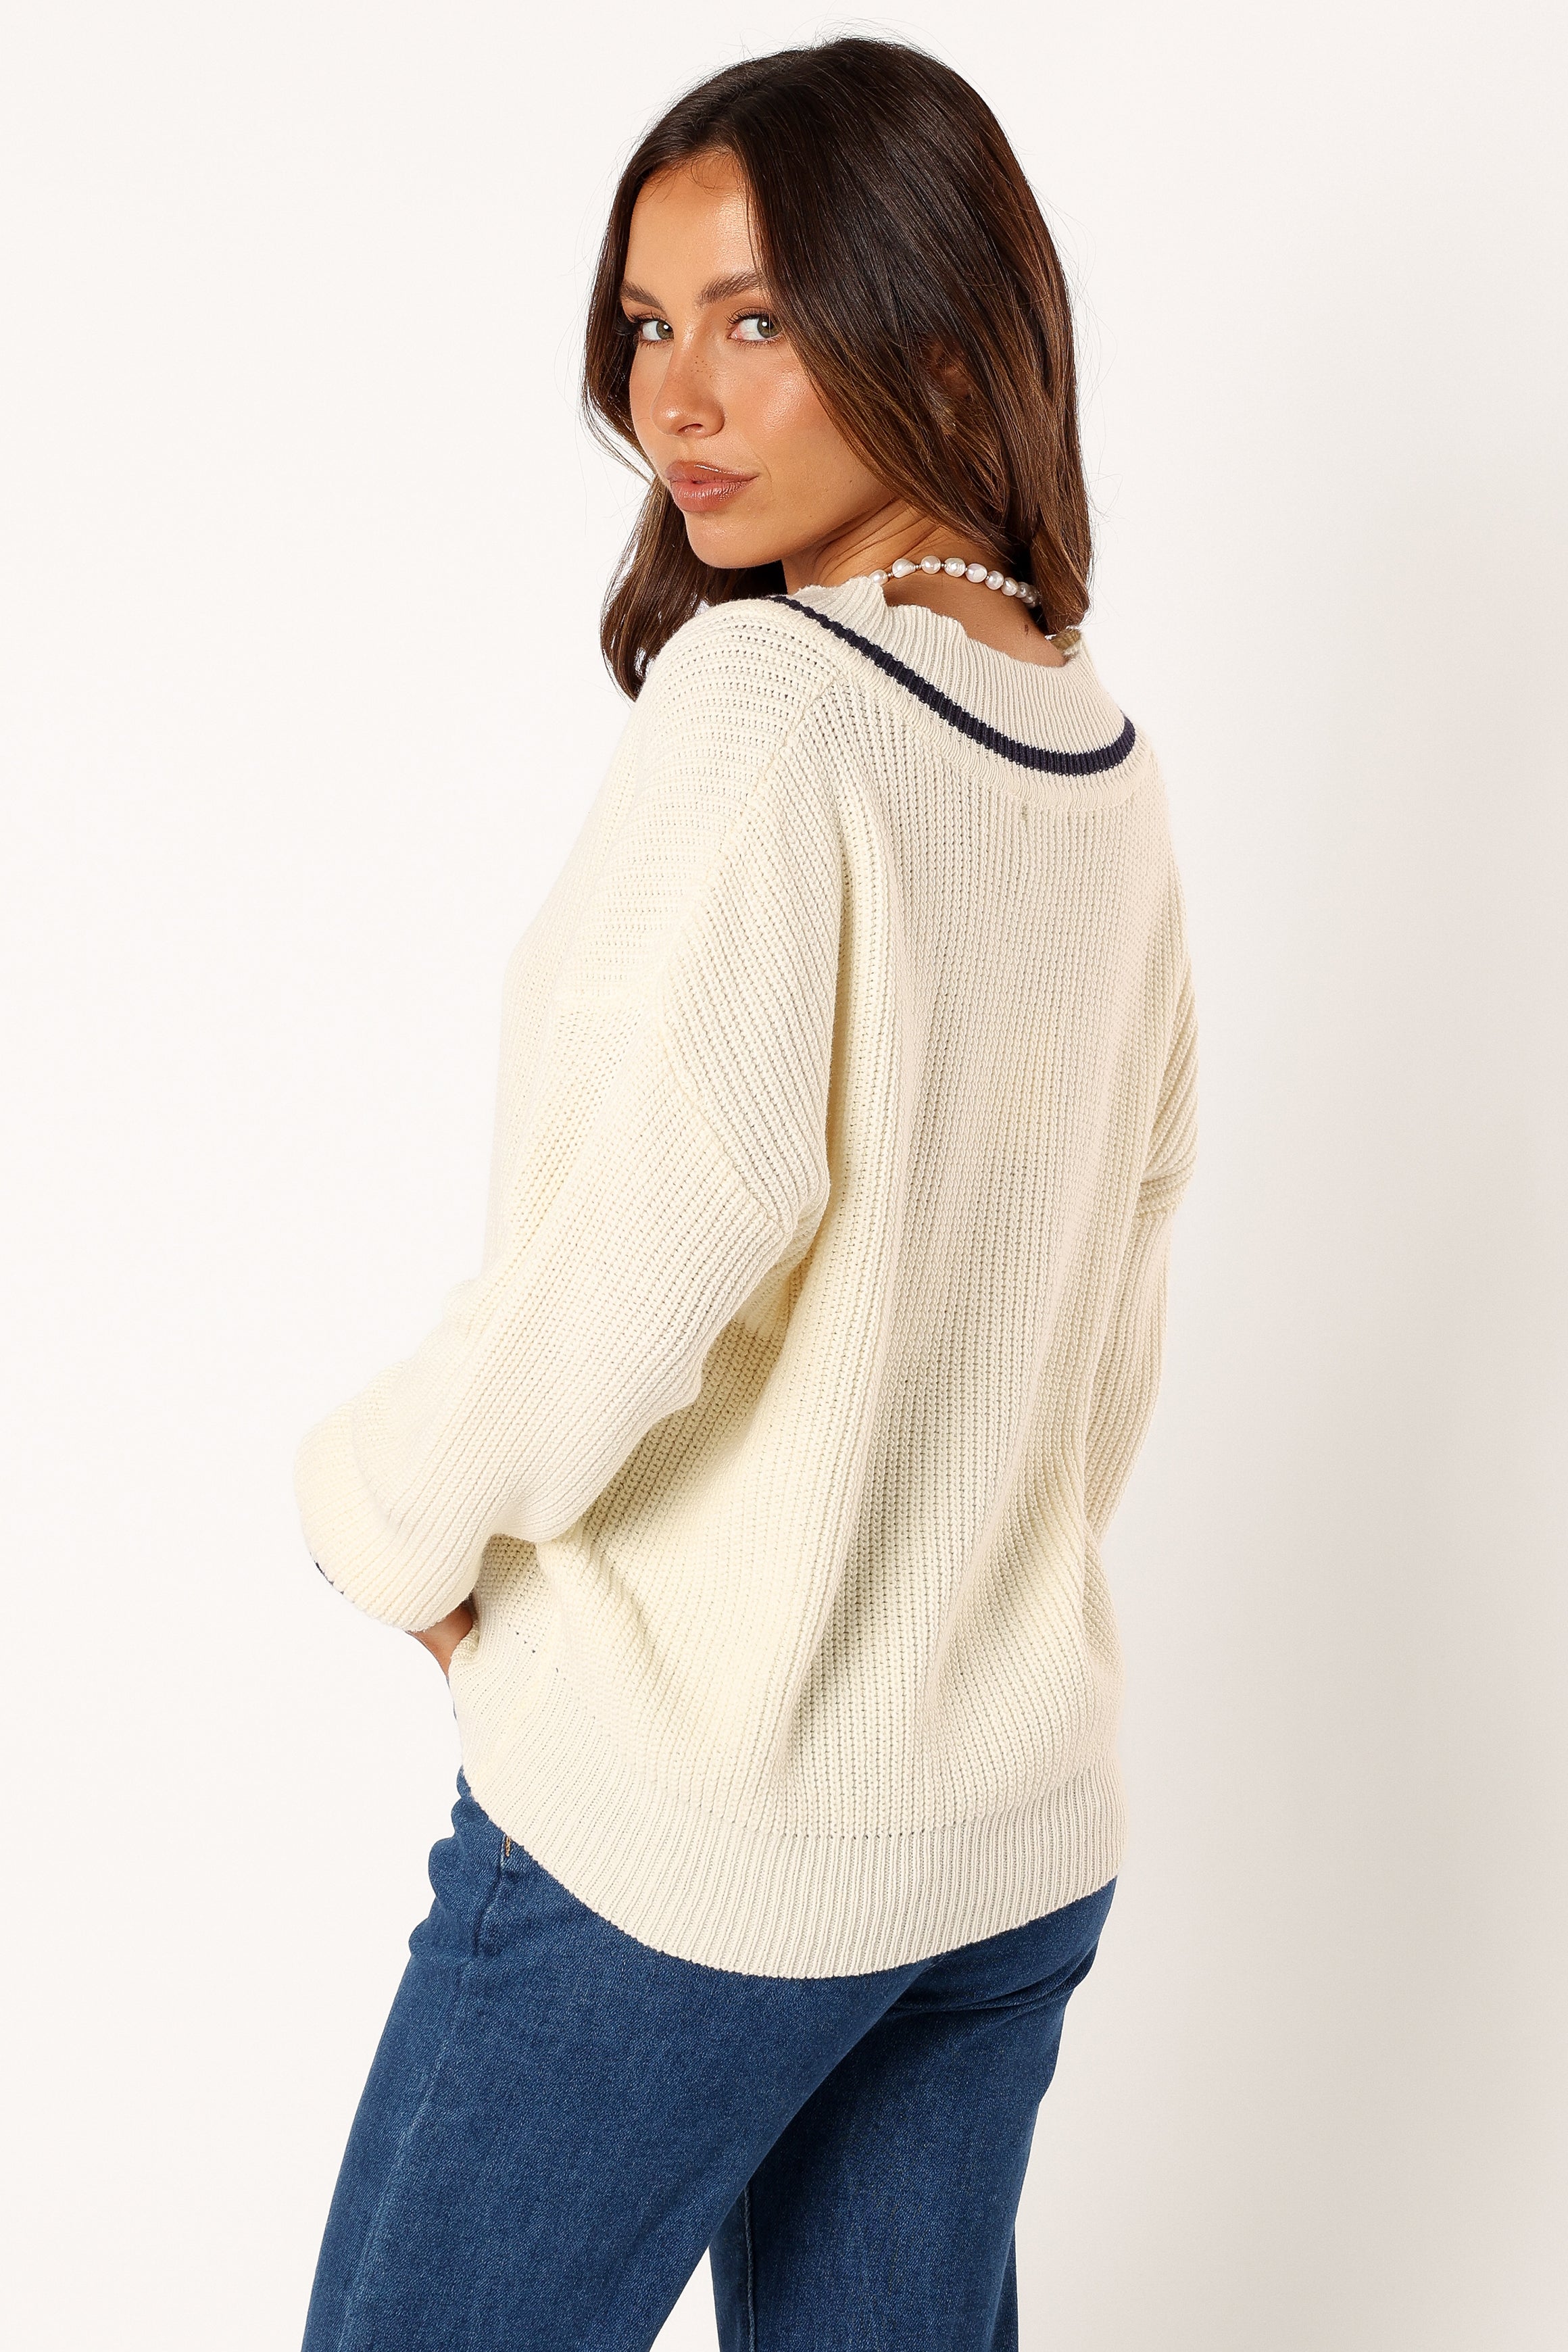 Dominique Contrast Vneck Knit Sweater - Ivory/Navy